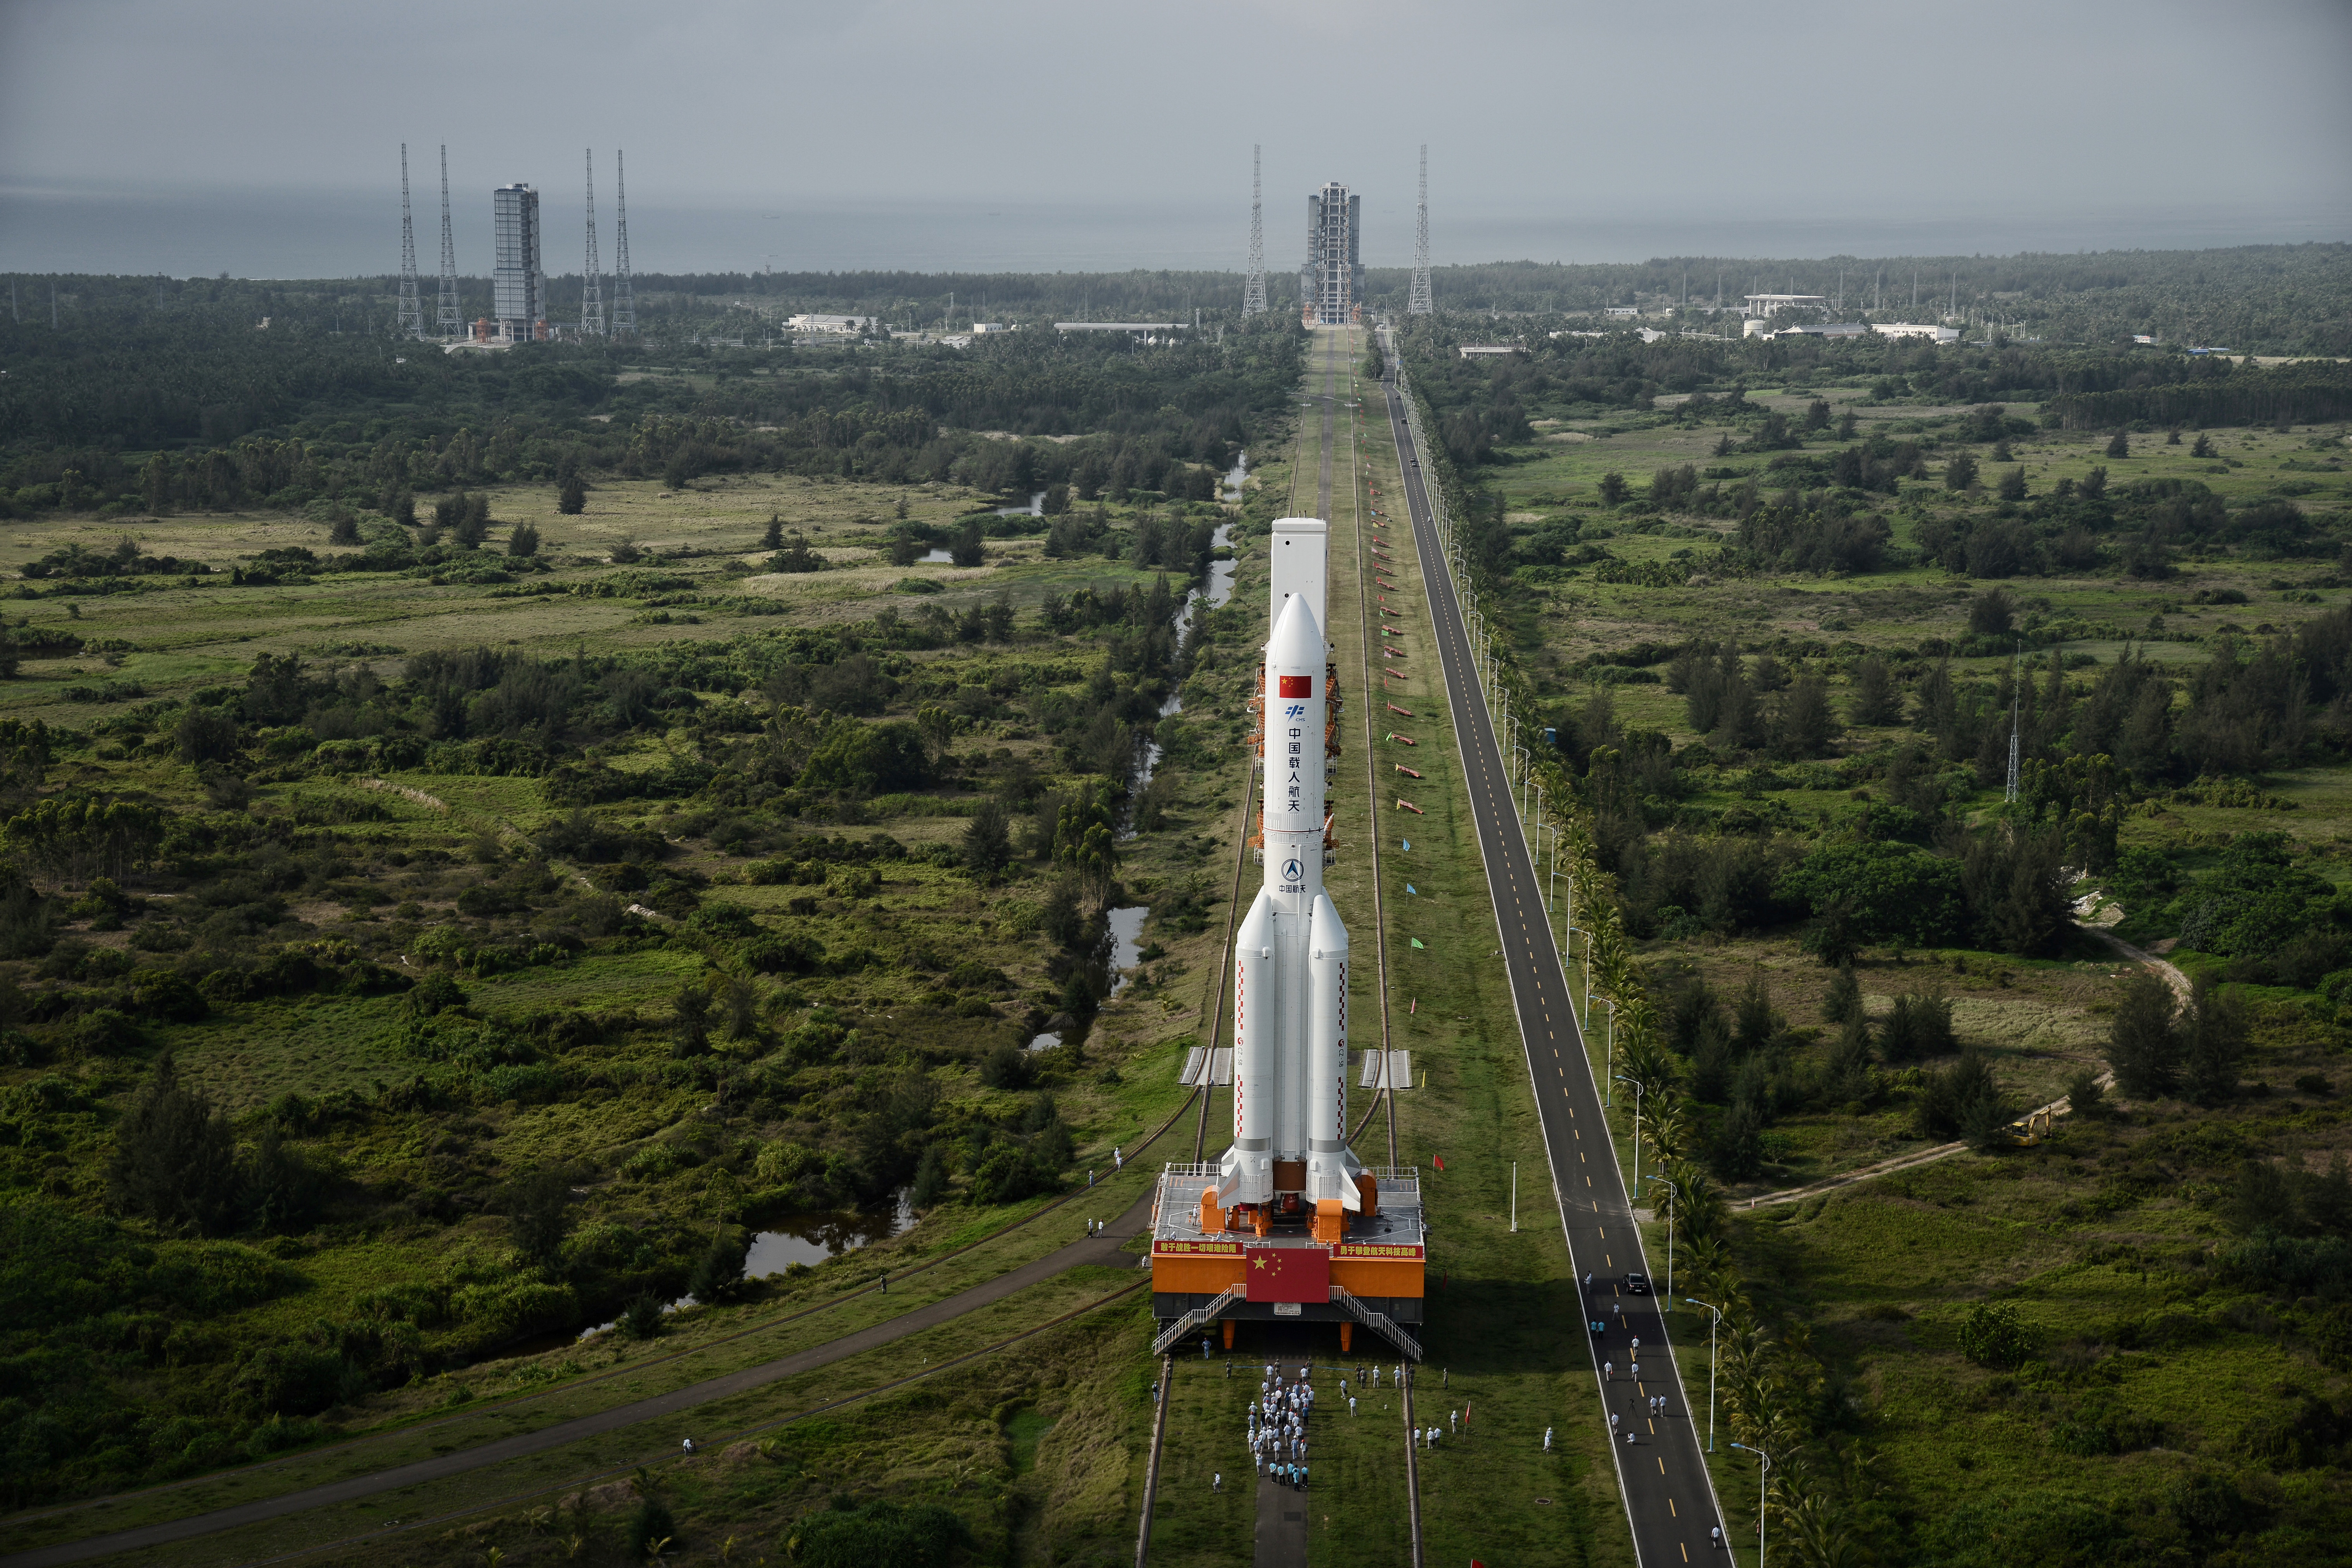 Spain temporarily closed its airspace due to an out-of-control Chinese rocket